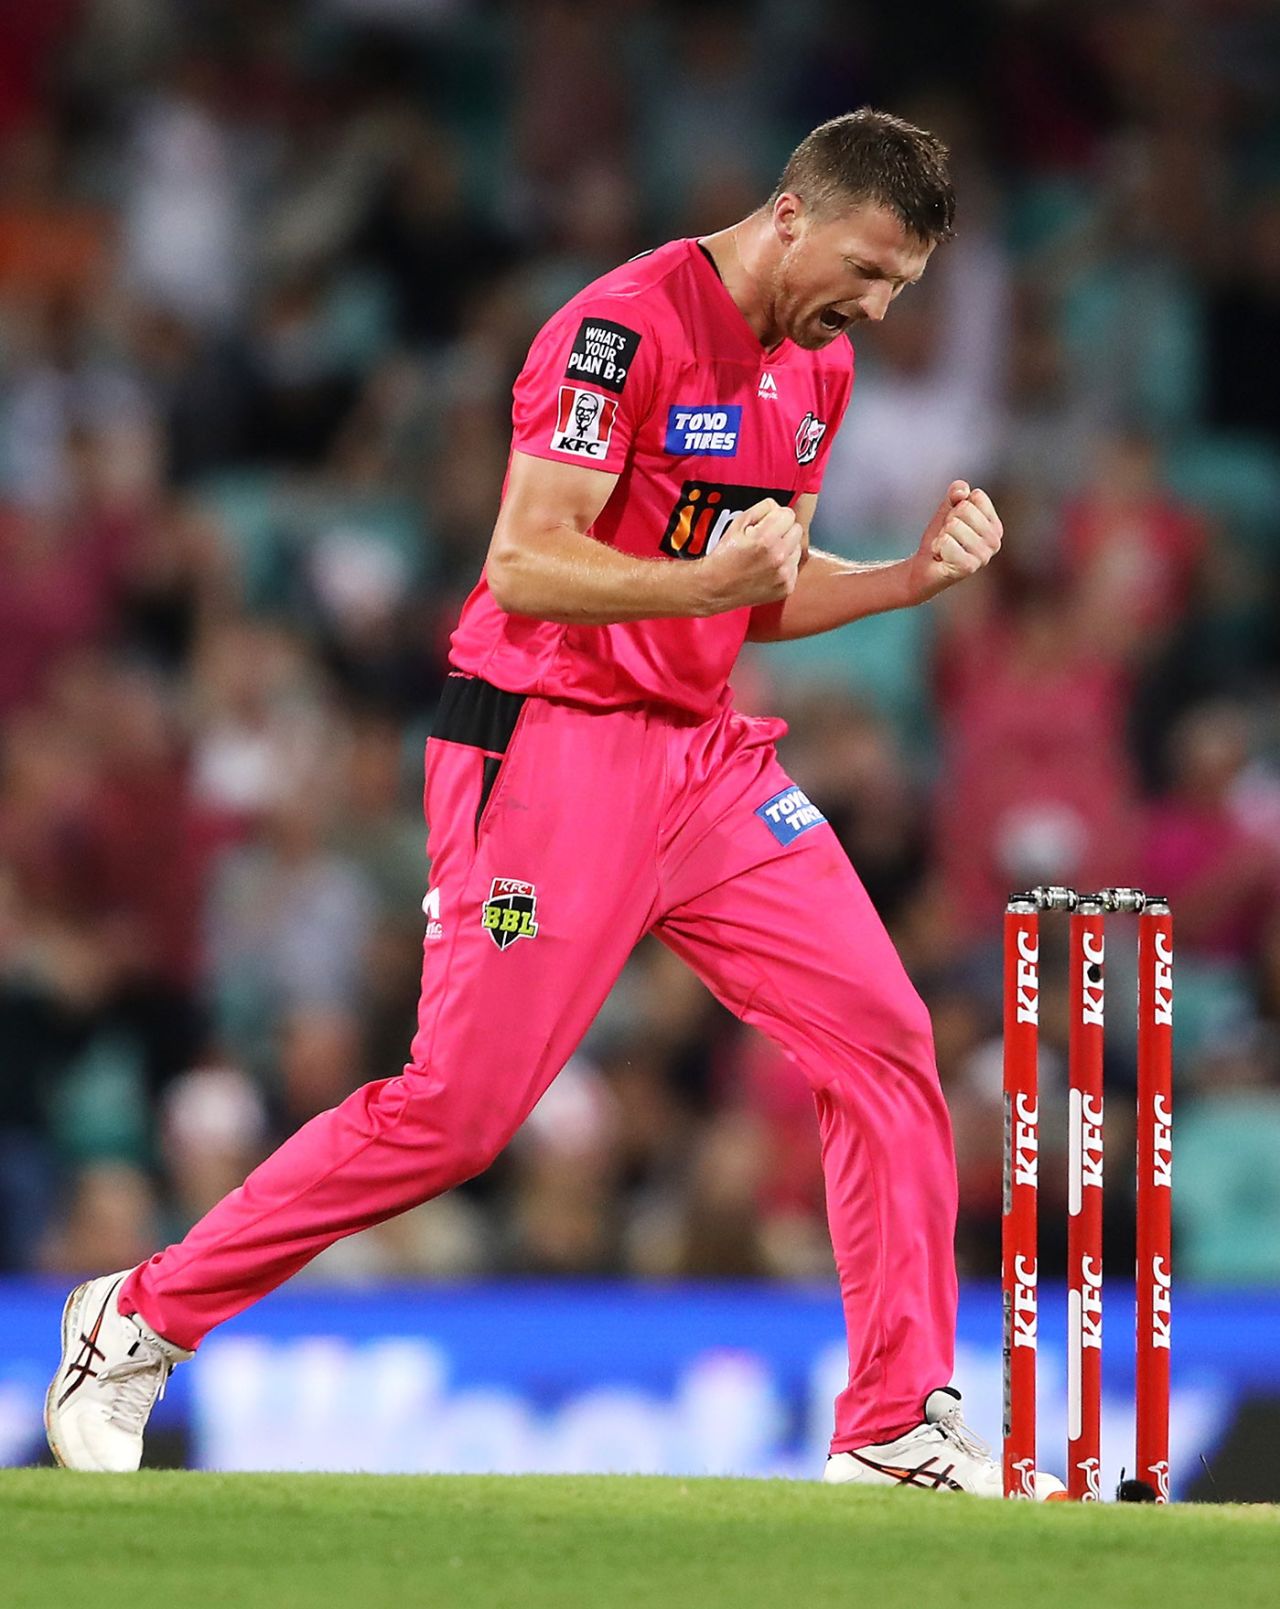 Jackson Bird removed both Perth Scorchers openers when they were set, Sydney Sixers vs Perth Scorchers, BBL final, SCG, February 6, 2021